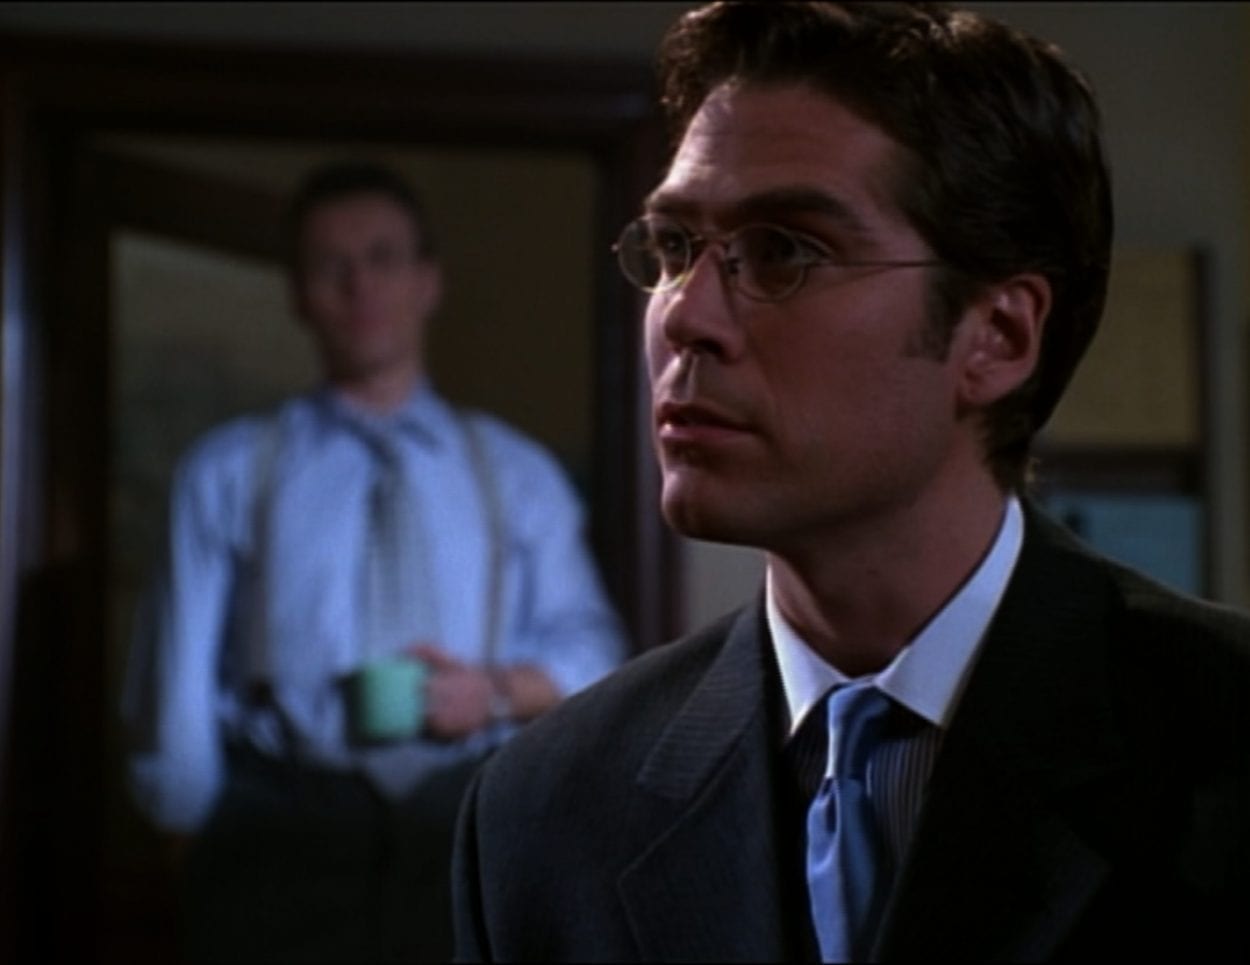 Wesley is giving advice in Sunnydale High Library while Giles looks on